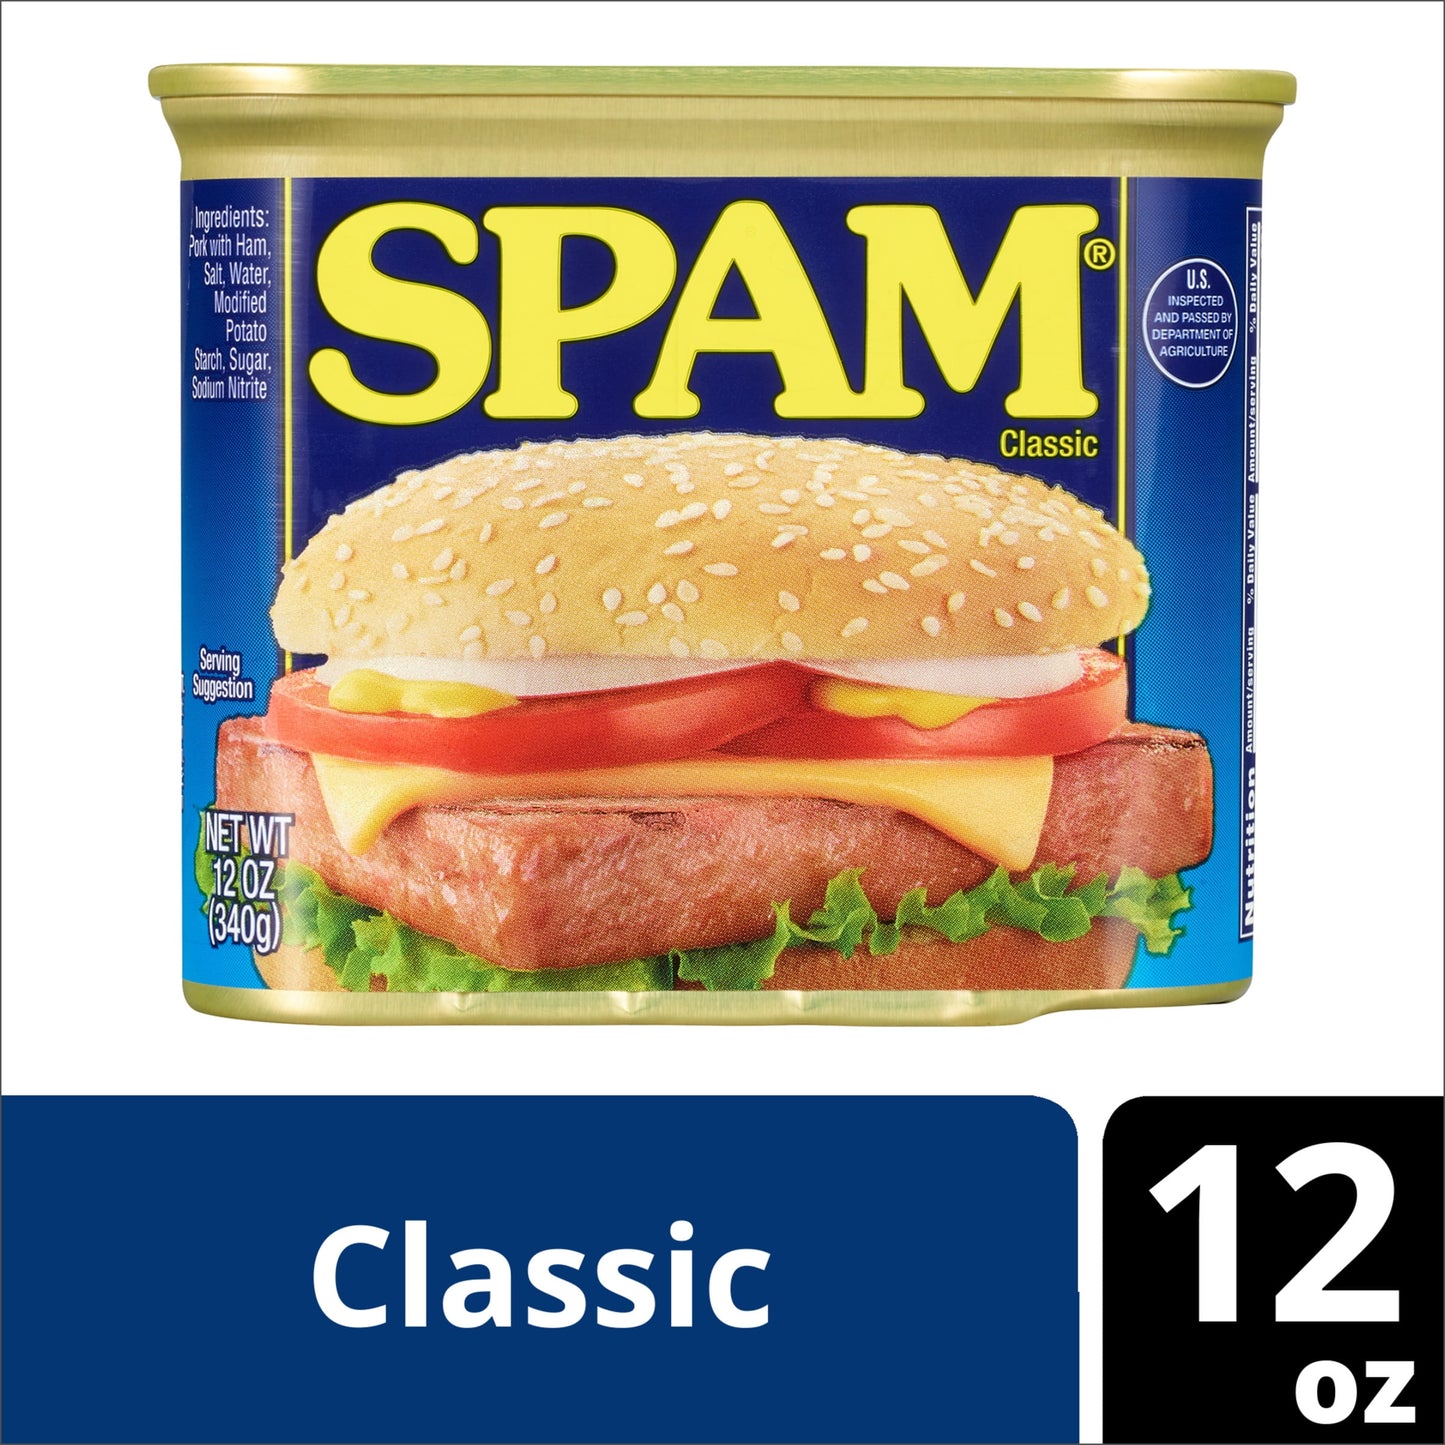 SPAM Classic, 7 g of Protein, 12 oz Can